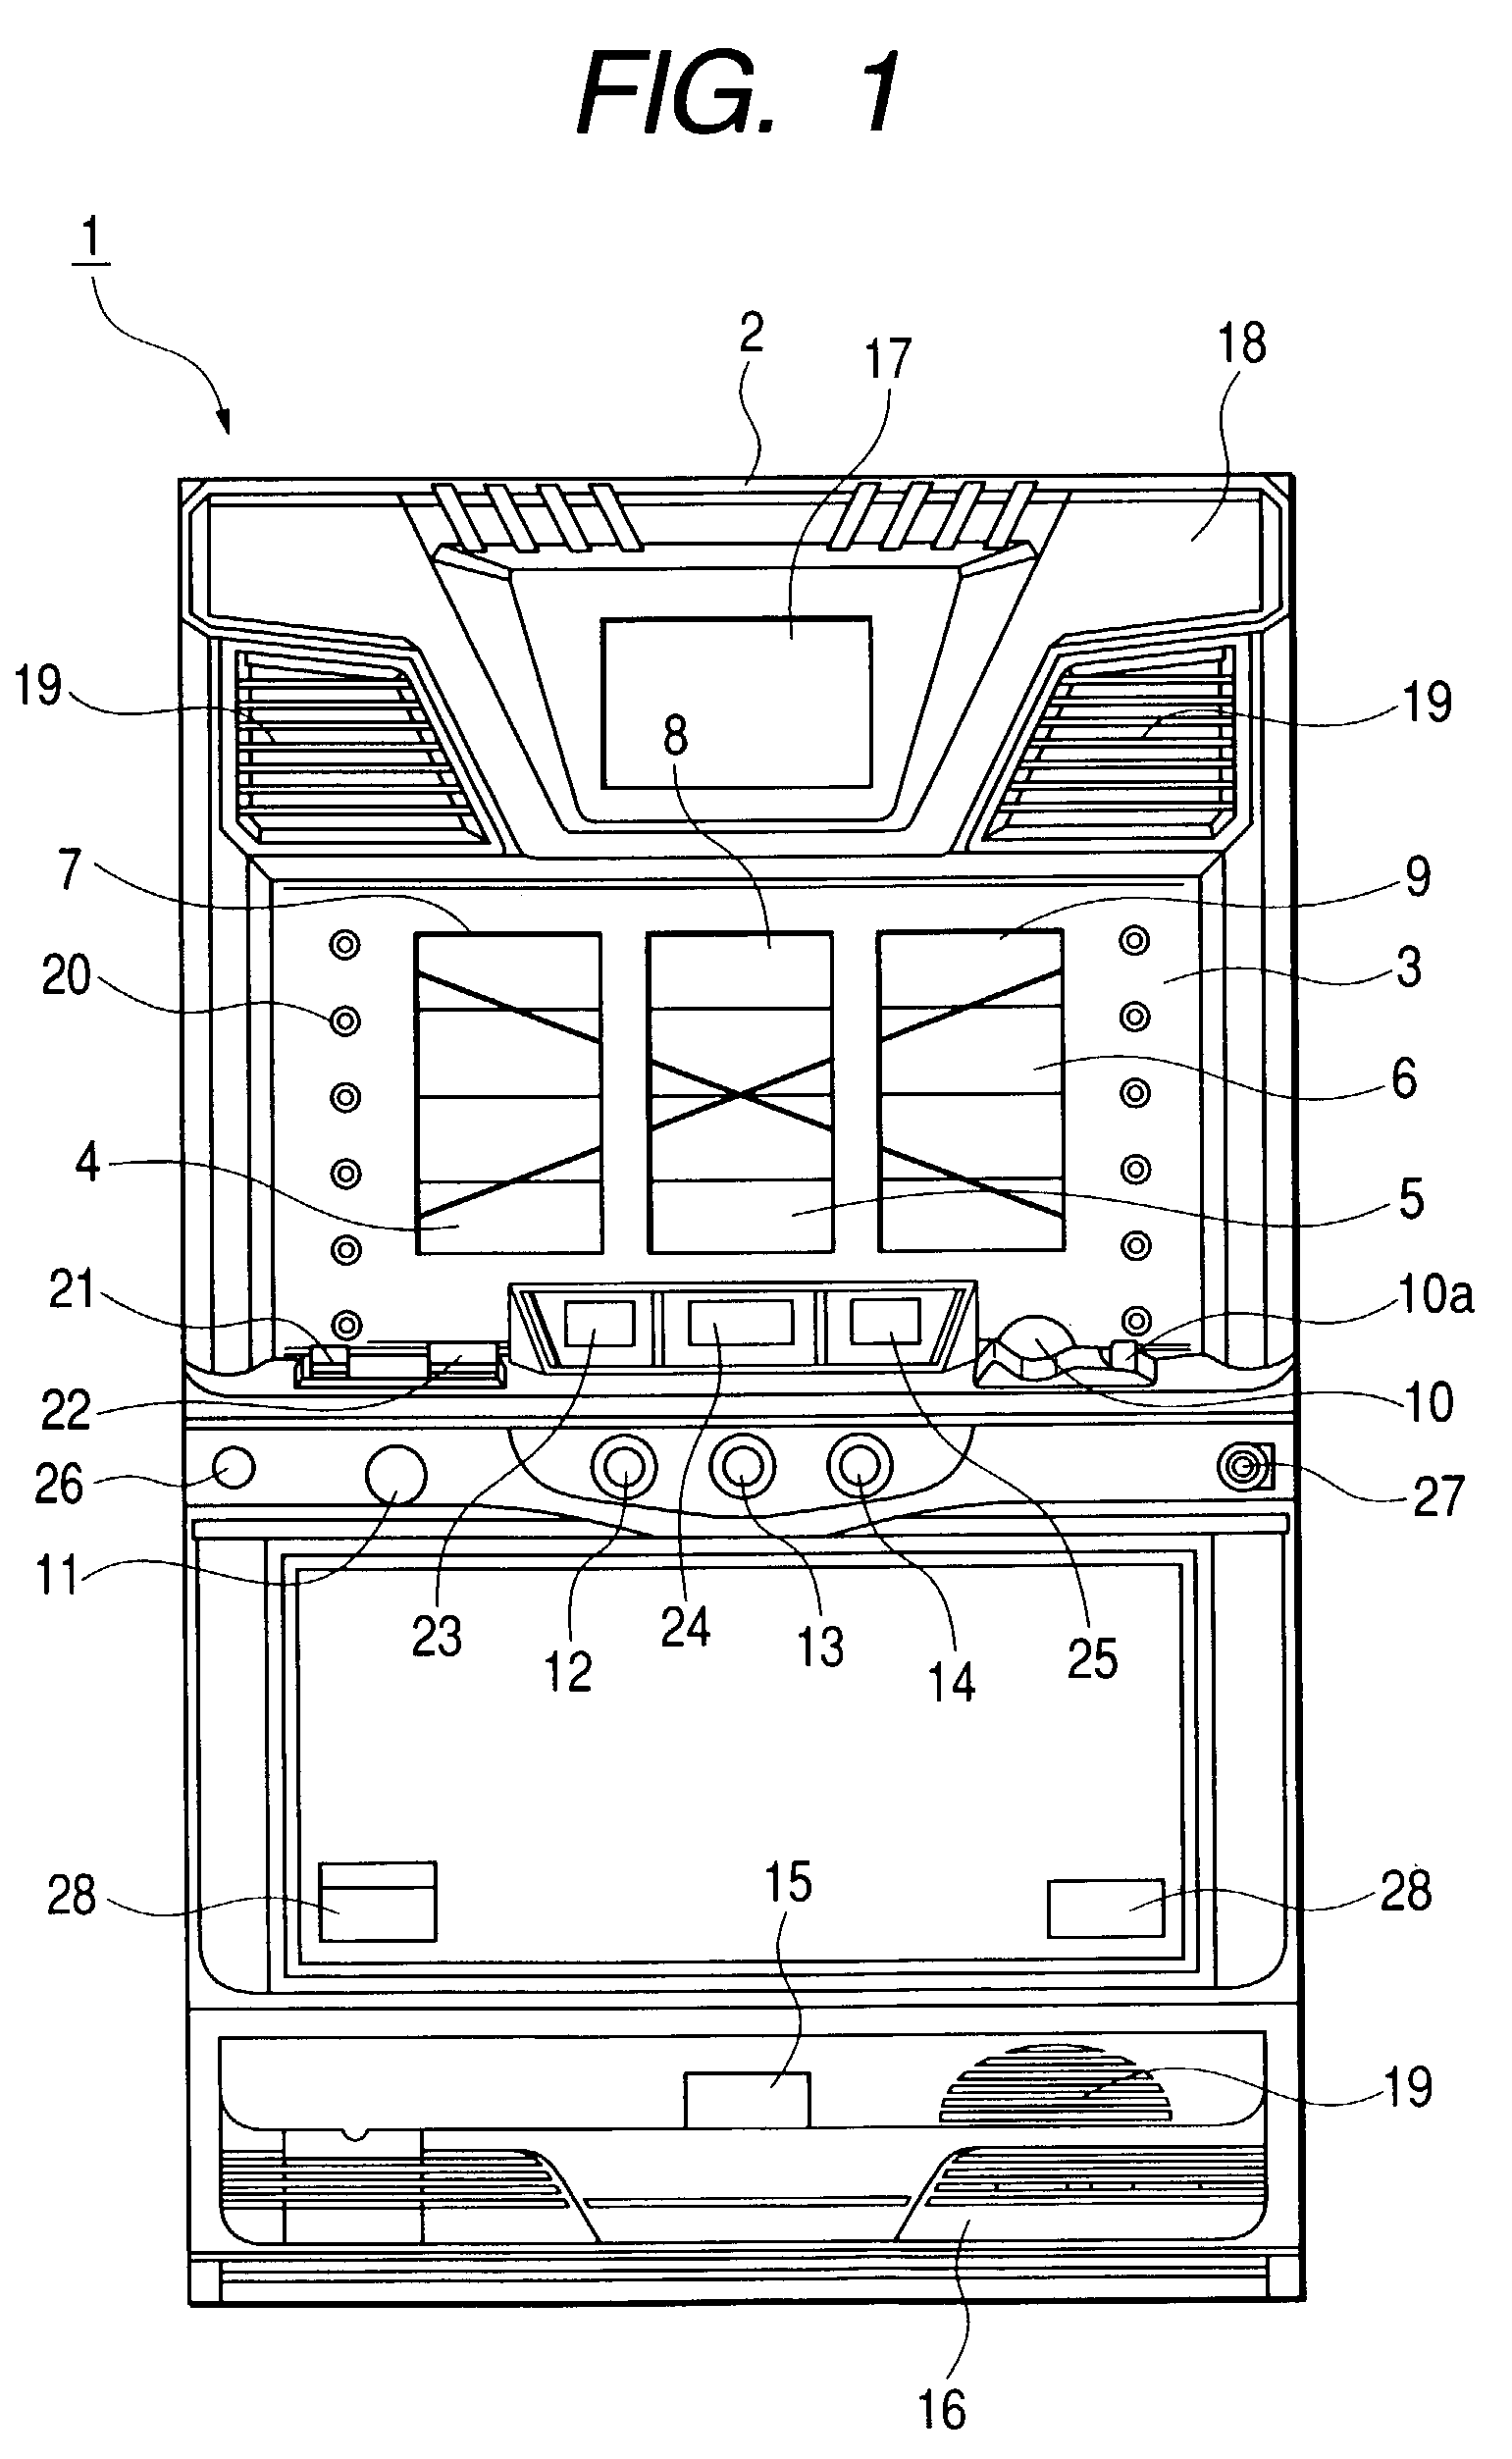 Game machine, game machine system, and method of controlling a game machine reel spin time